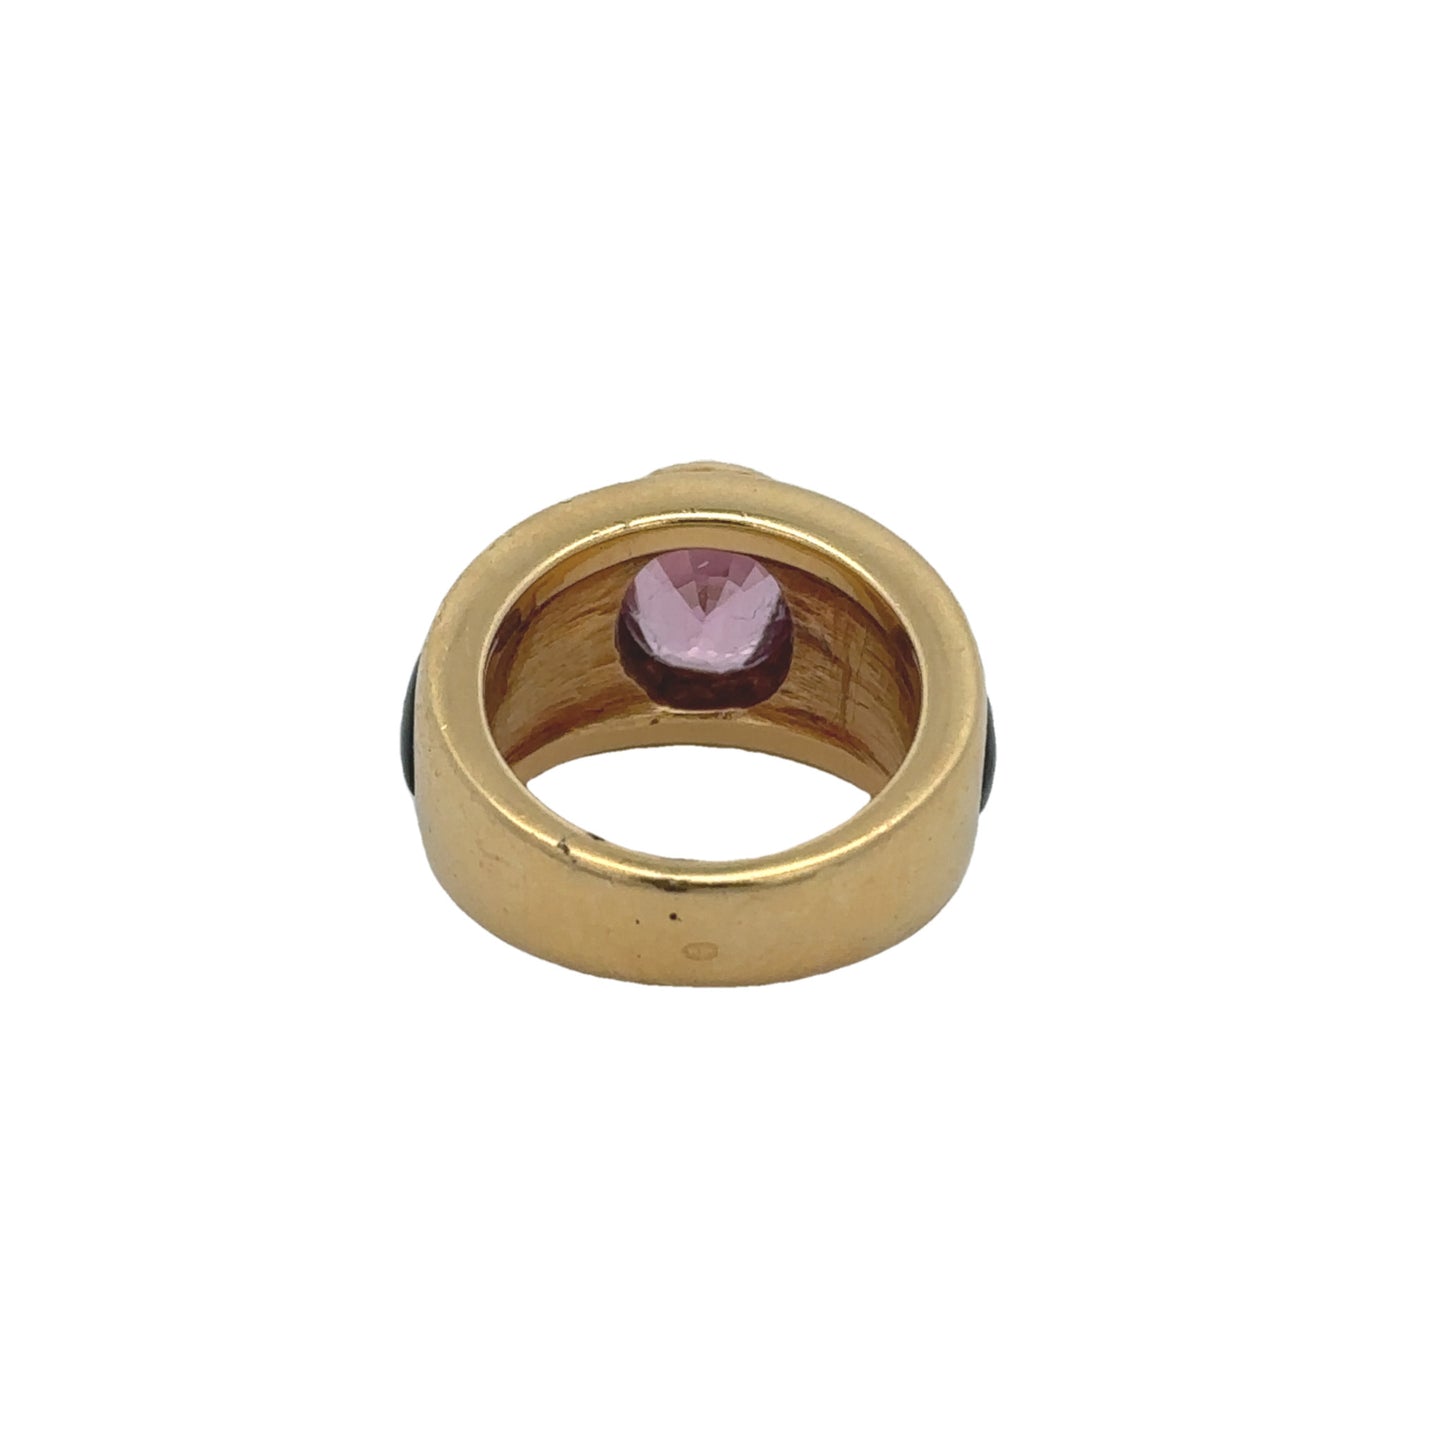 1970s 18KT Yellow Gold Pink Spinel & Enamel Ring back